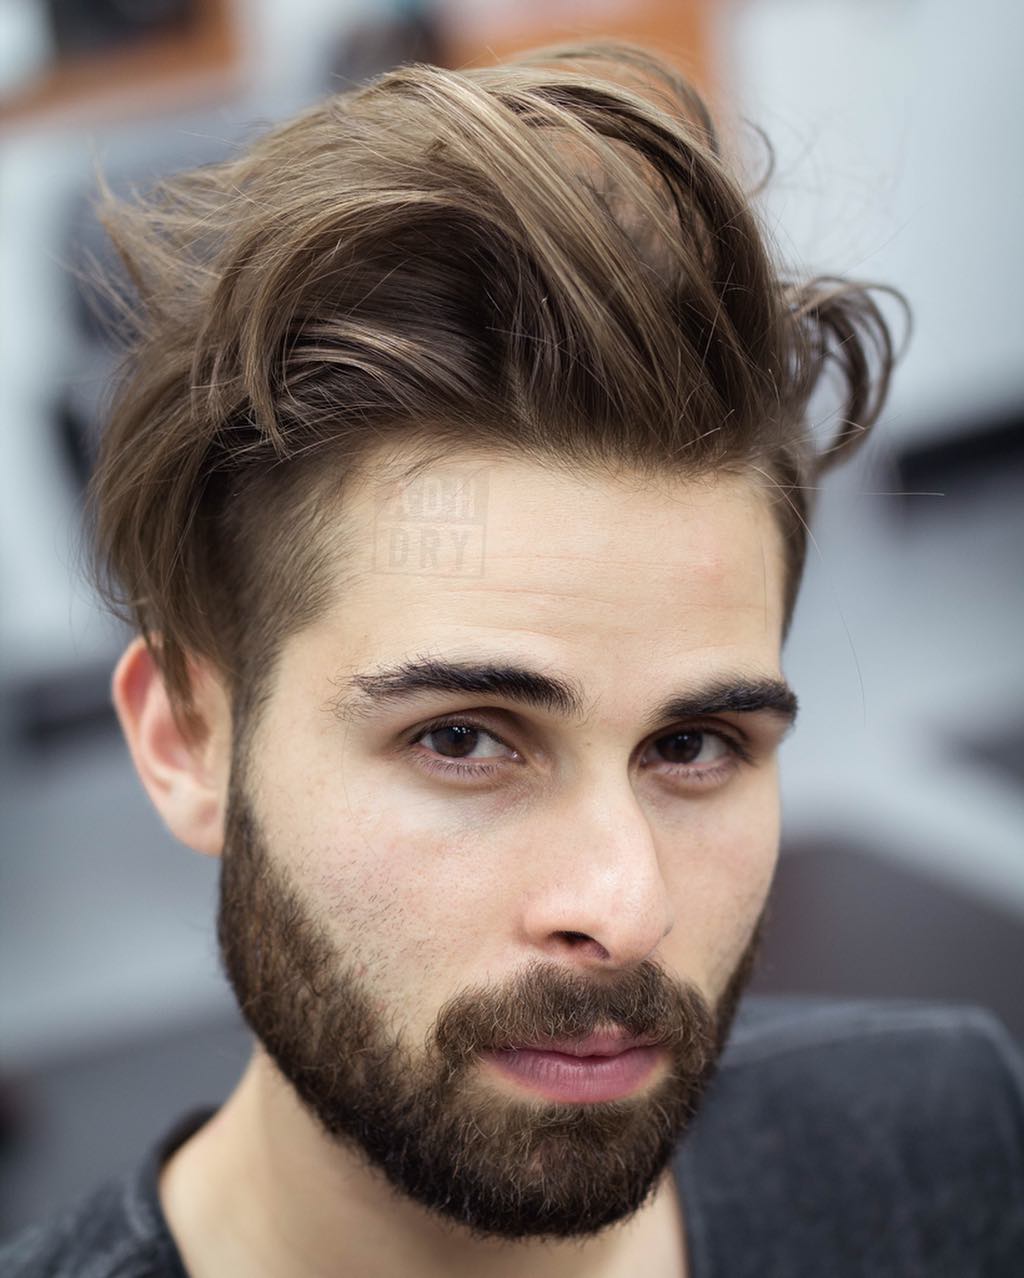 How To Grow Your Hair Out (Men